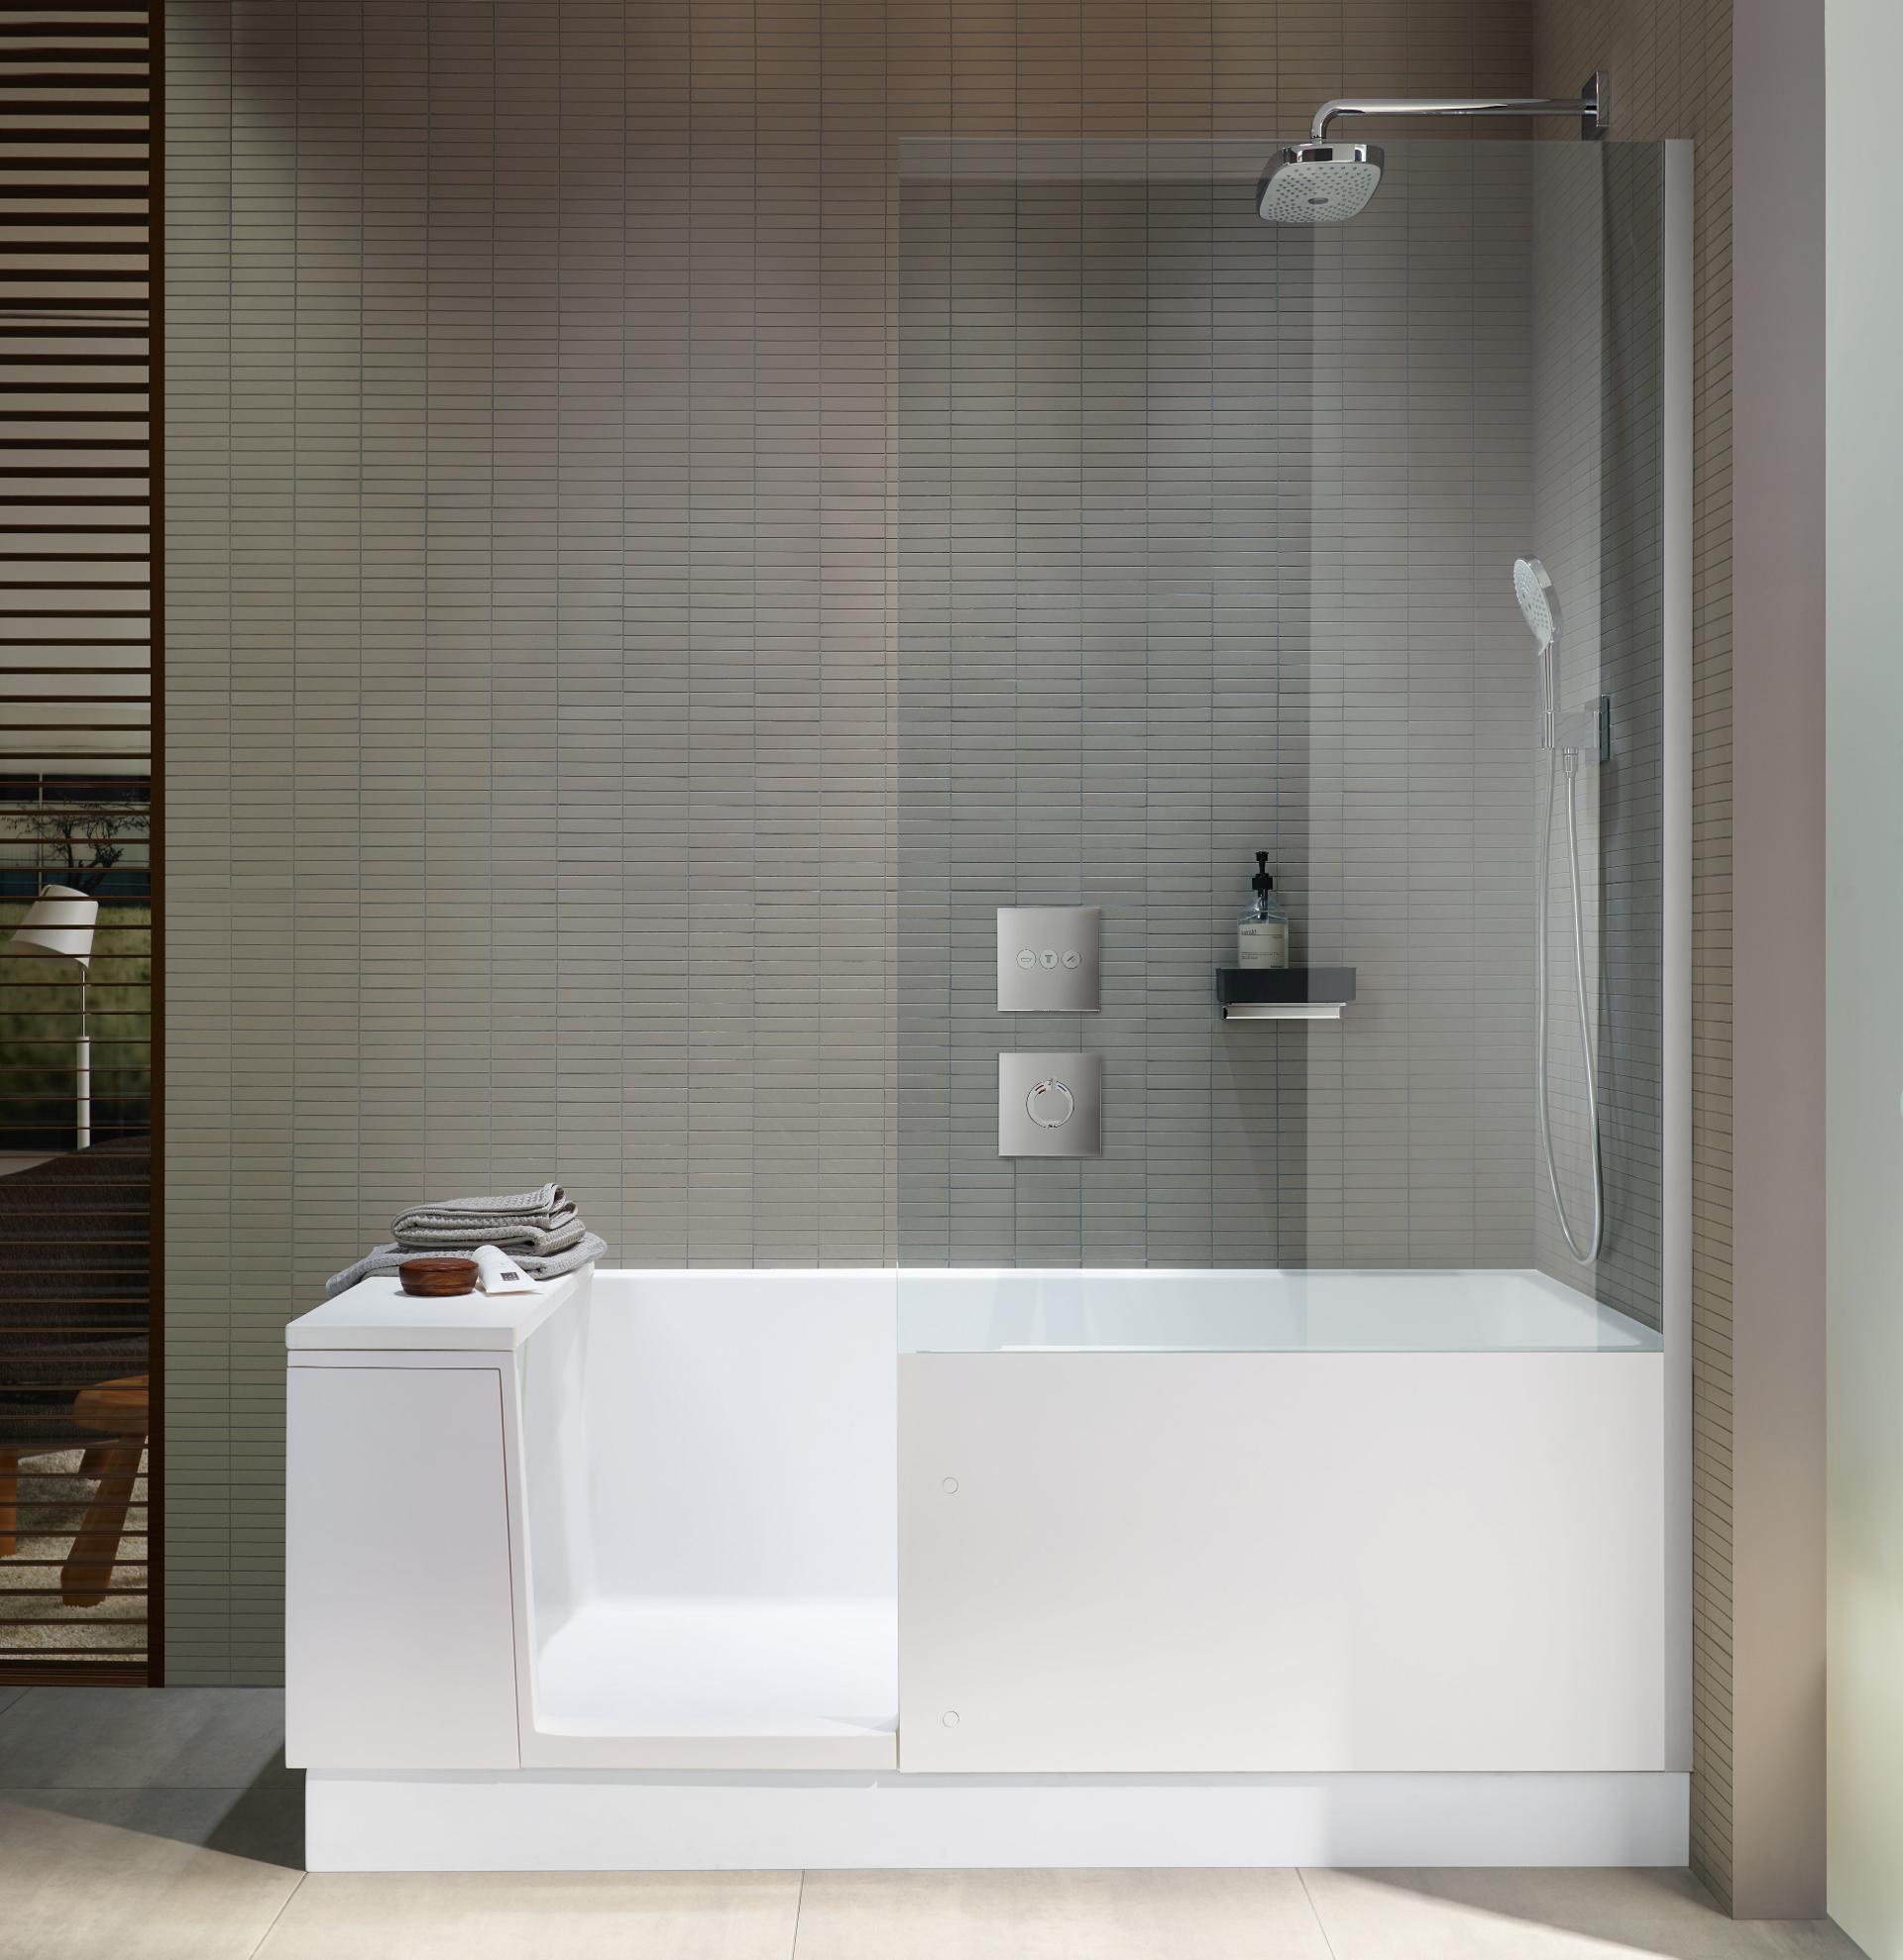 Shower and bathtub in one
